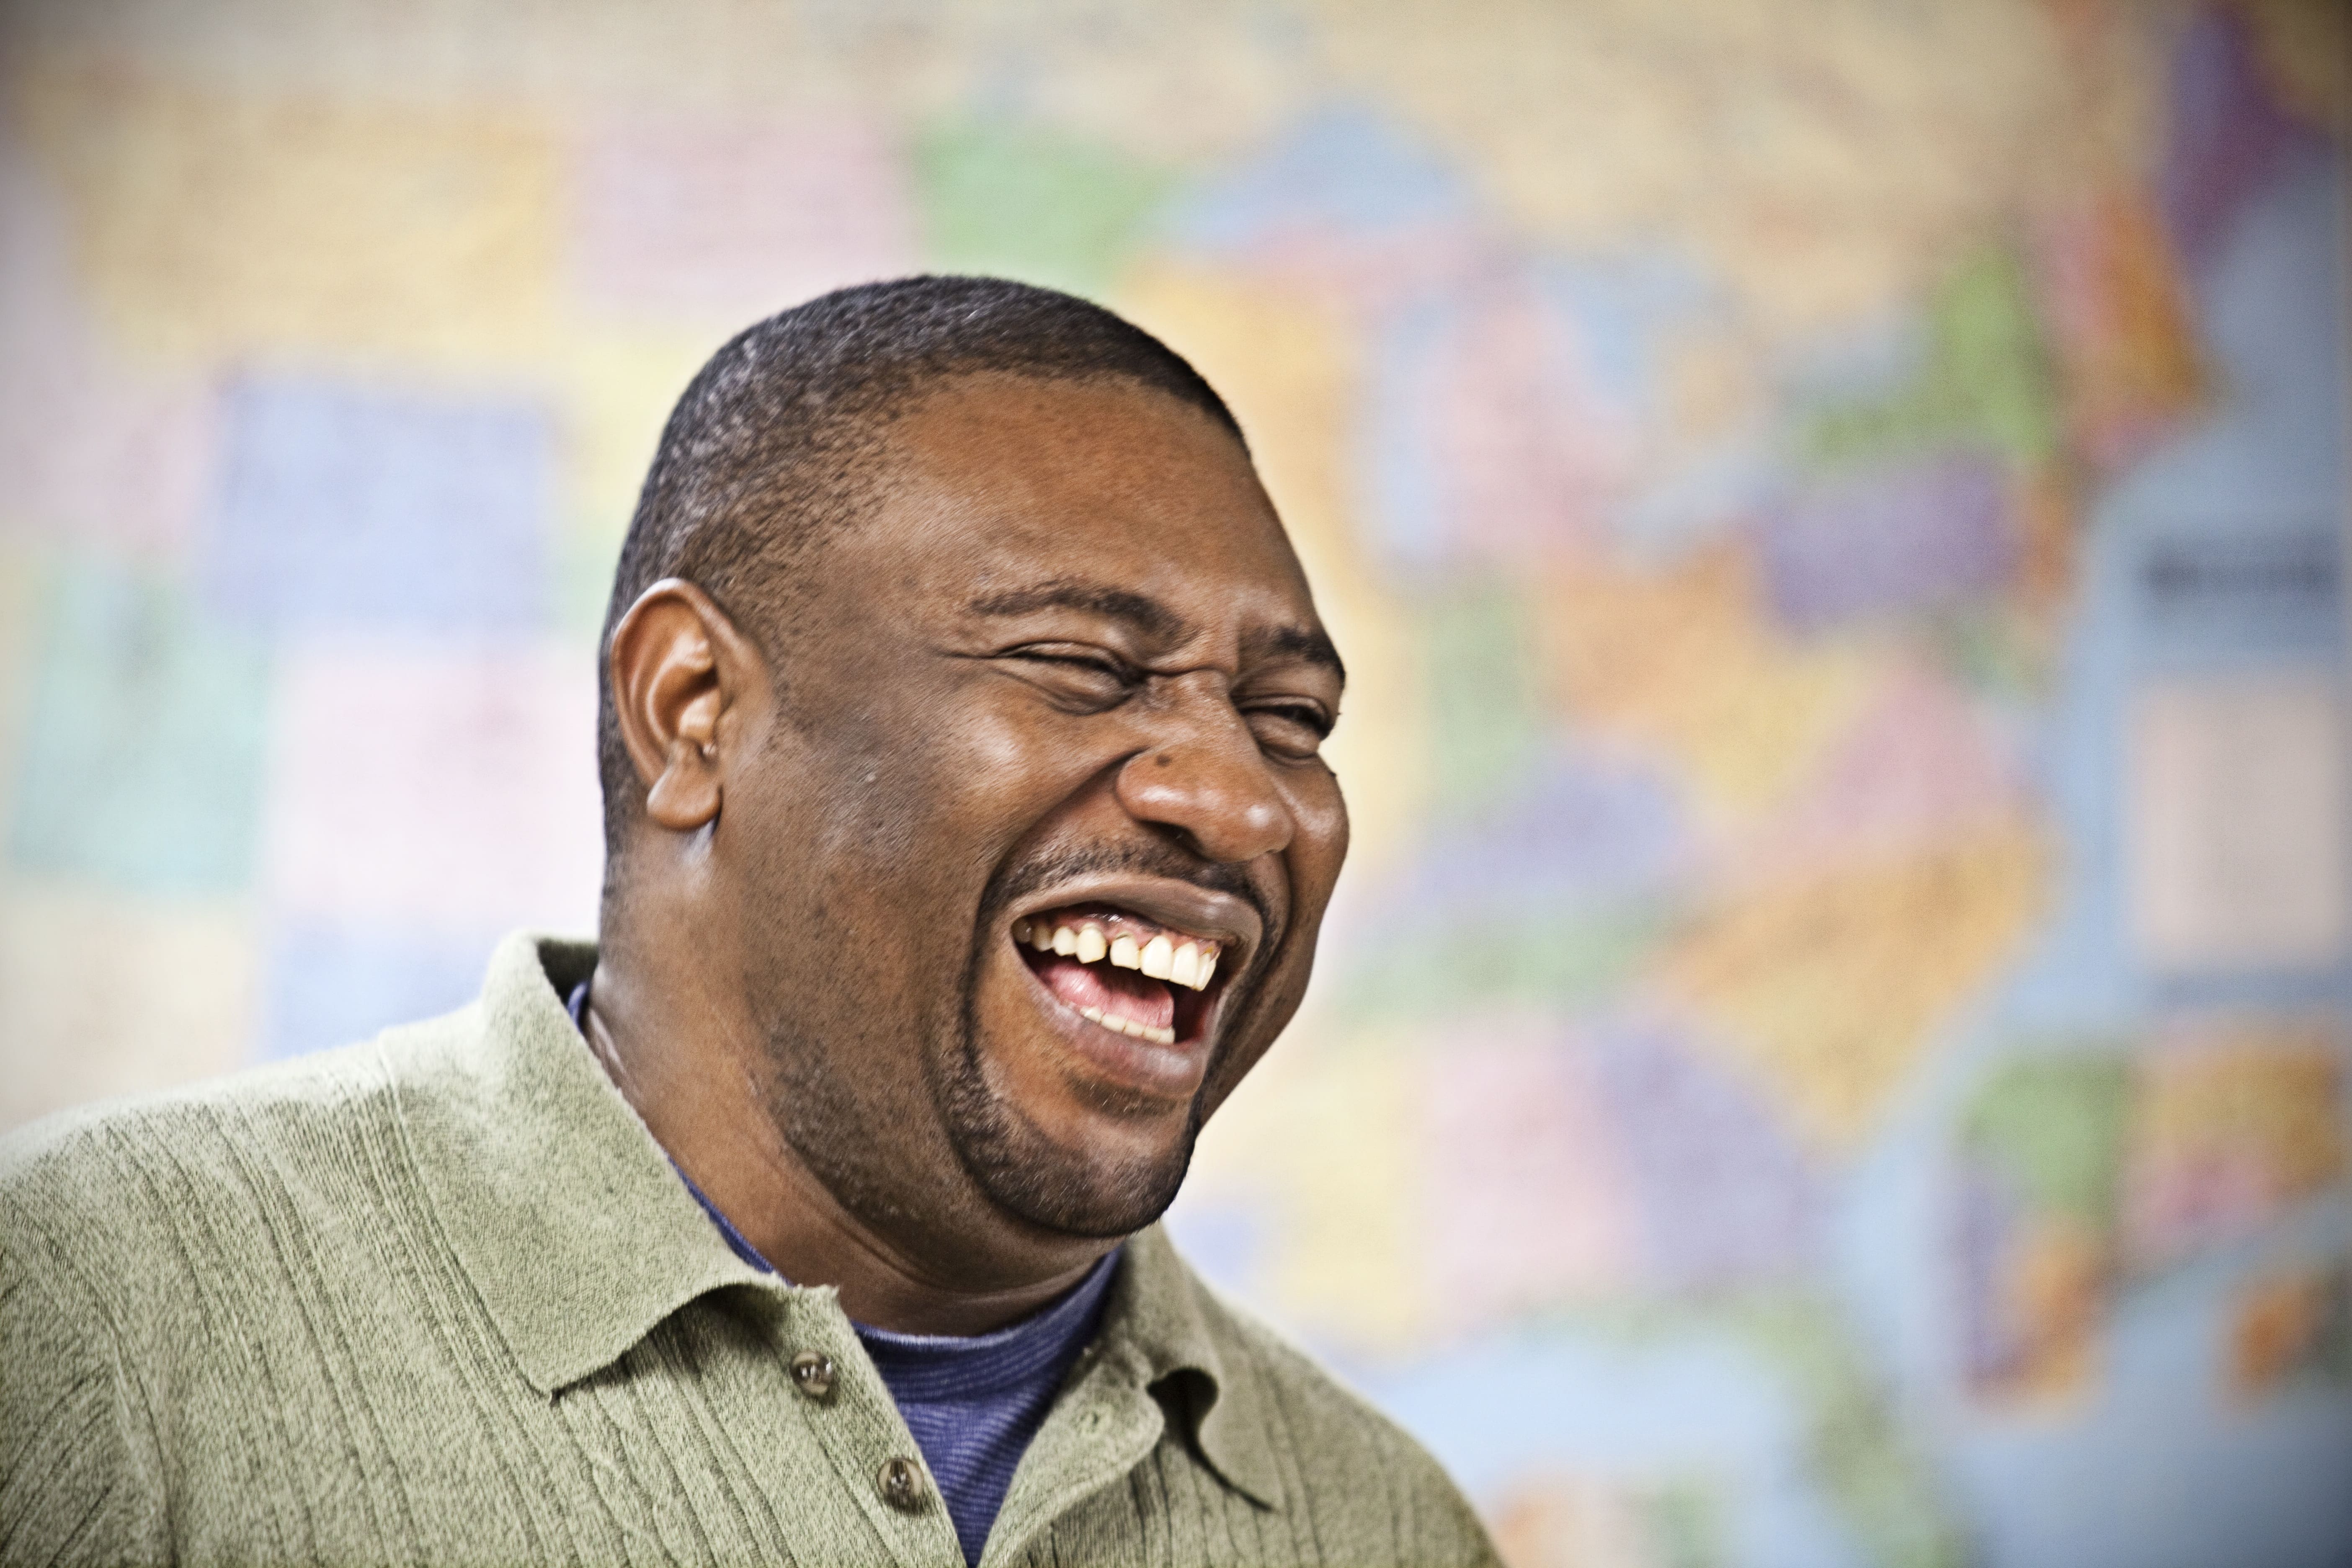 Man Smiling in front of Map of US